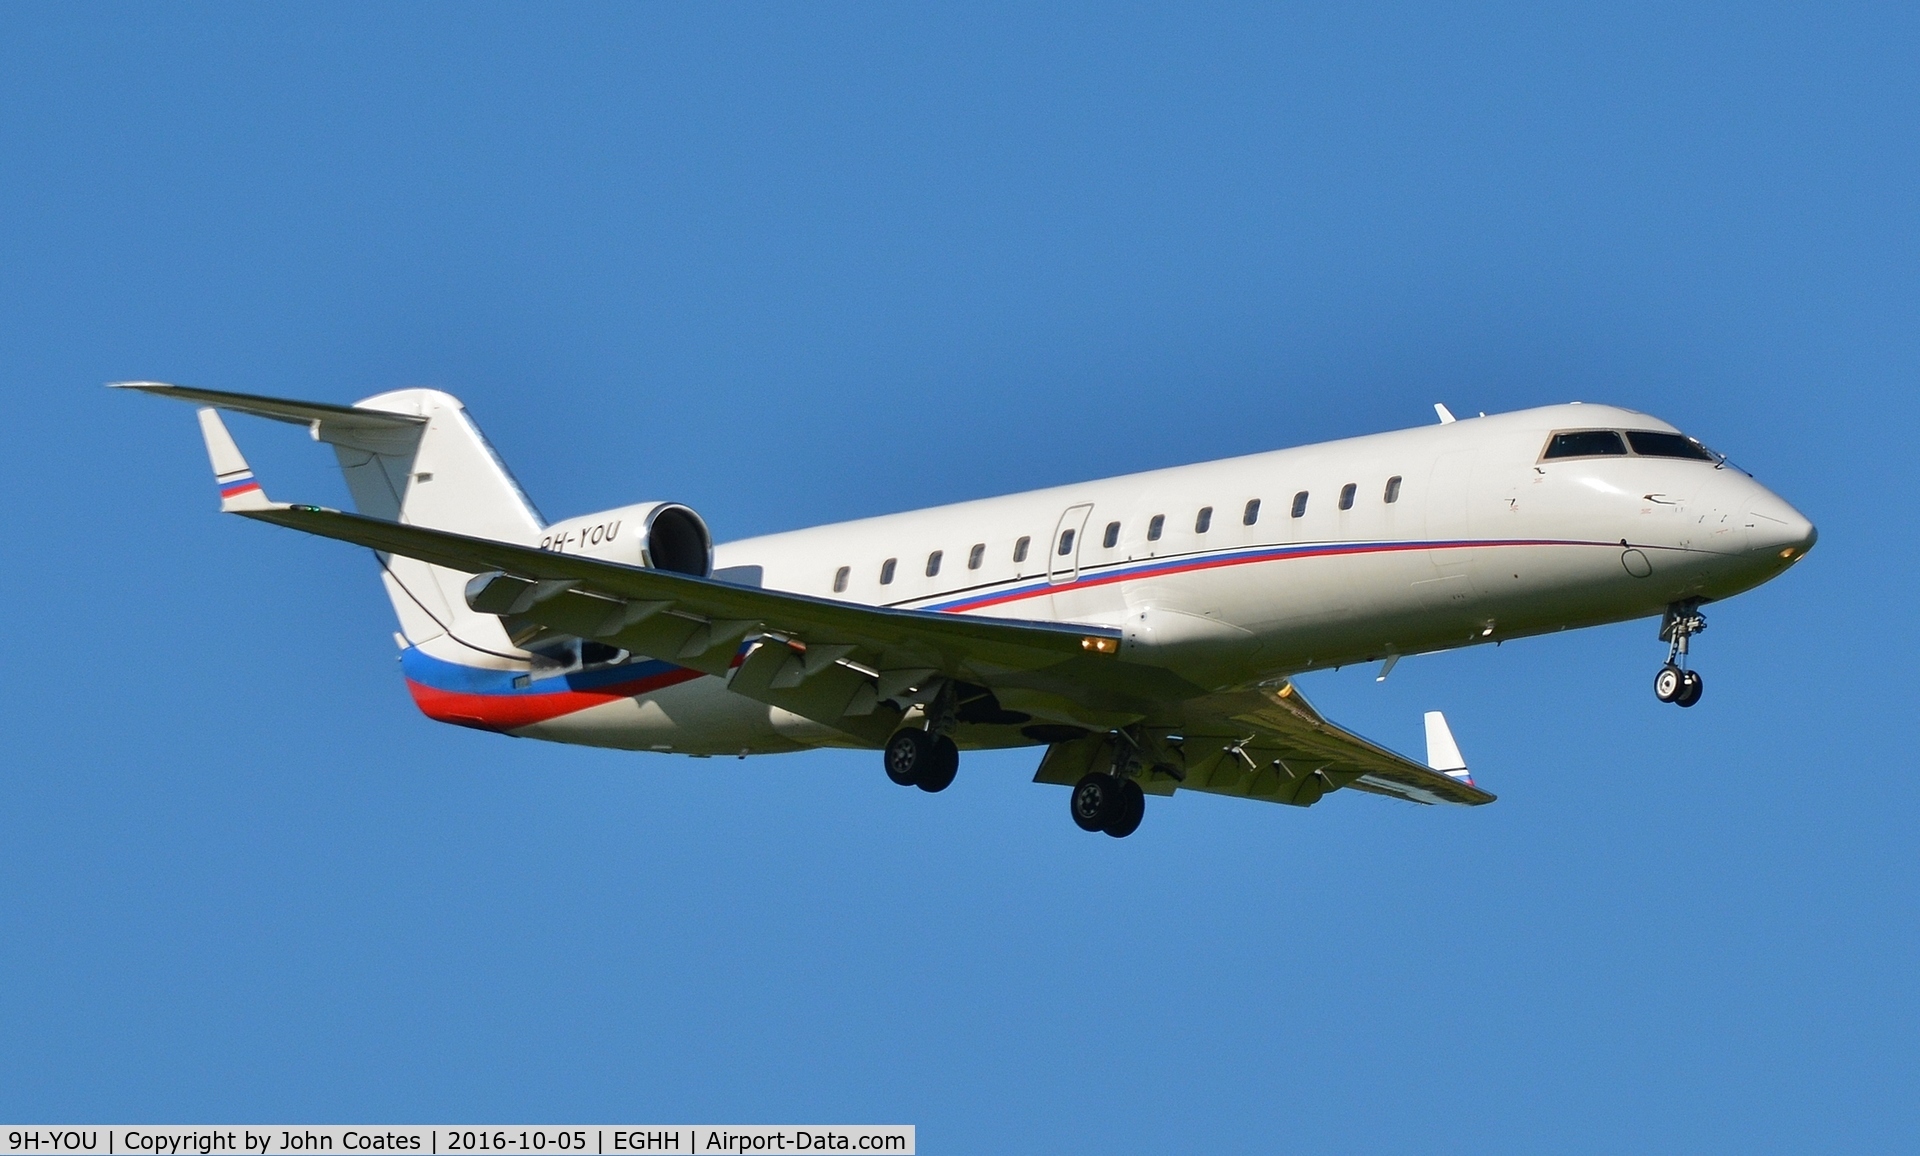 9H-YOU, 2008 Bombardier Challenger 850 (CL-600-2B19) C/N 8085, Final approach to 08